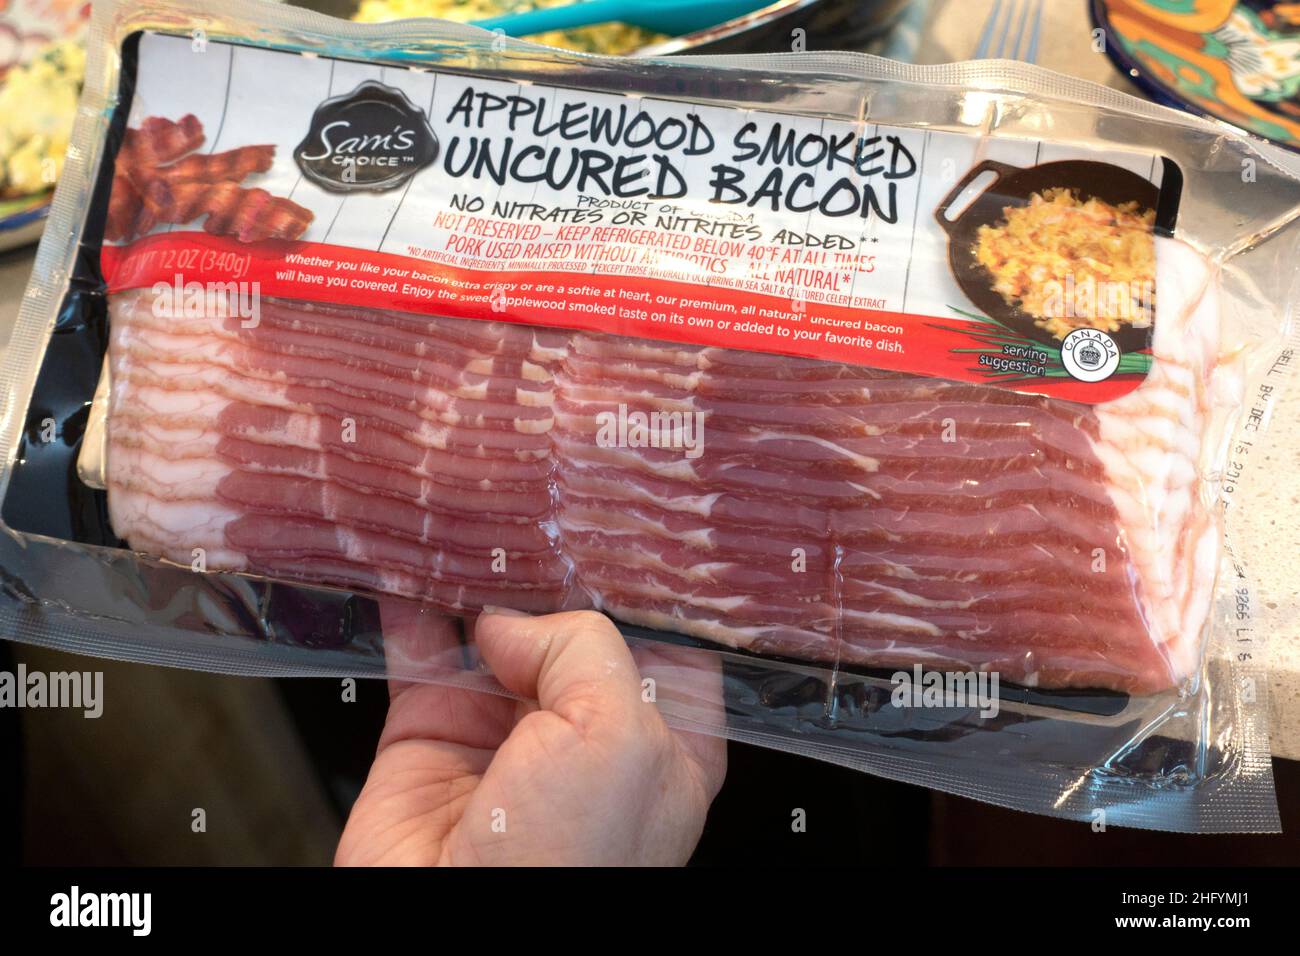 Applewood Smoked Uncured Bacon containing no nitrates or preservatives. Downers Grove Illinois IL USA Stock Photo